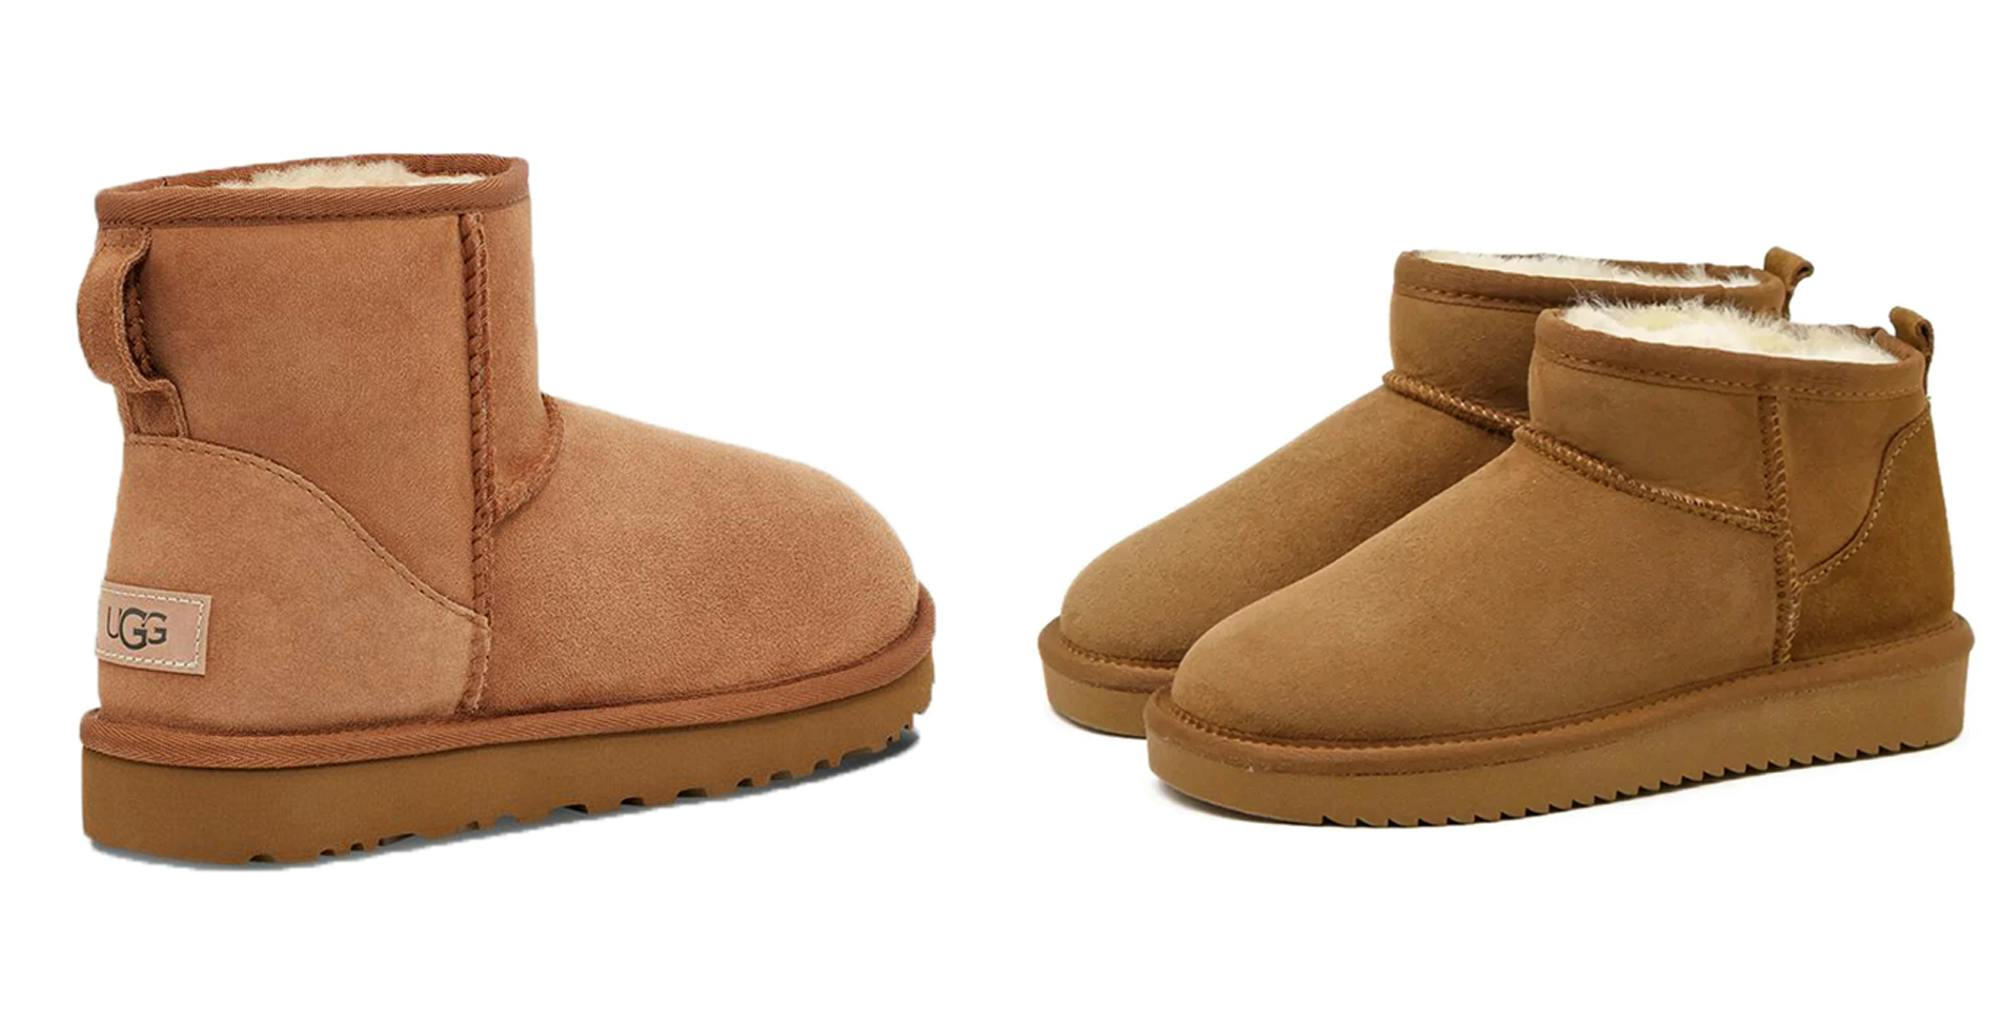 This $36 Ugg Lookalike Looks Just Like the Real Thing